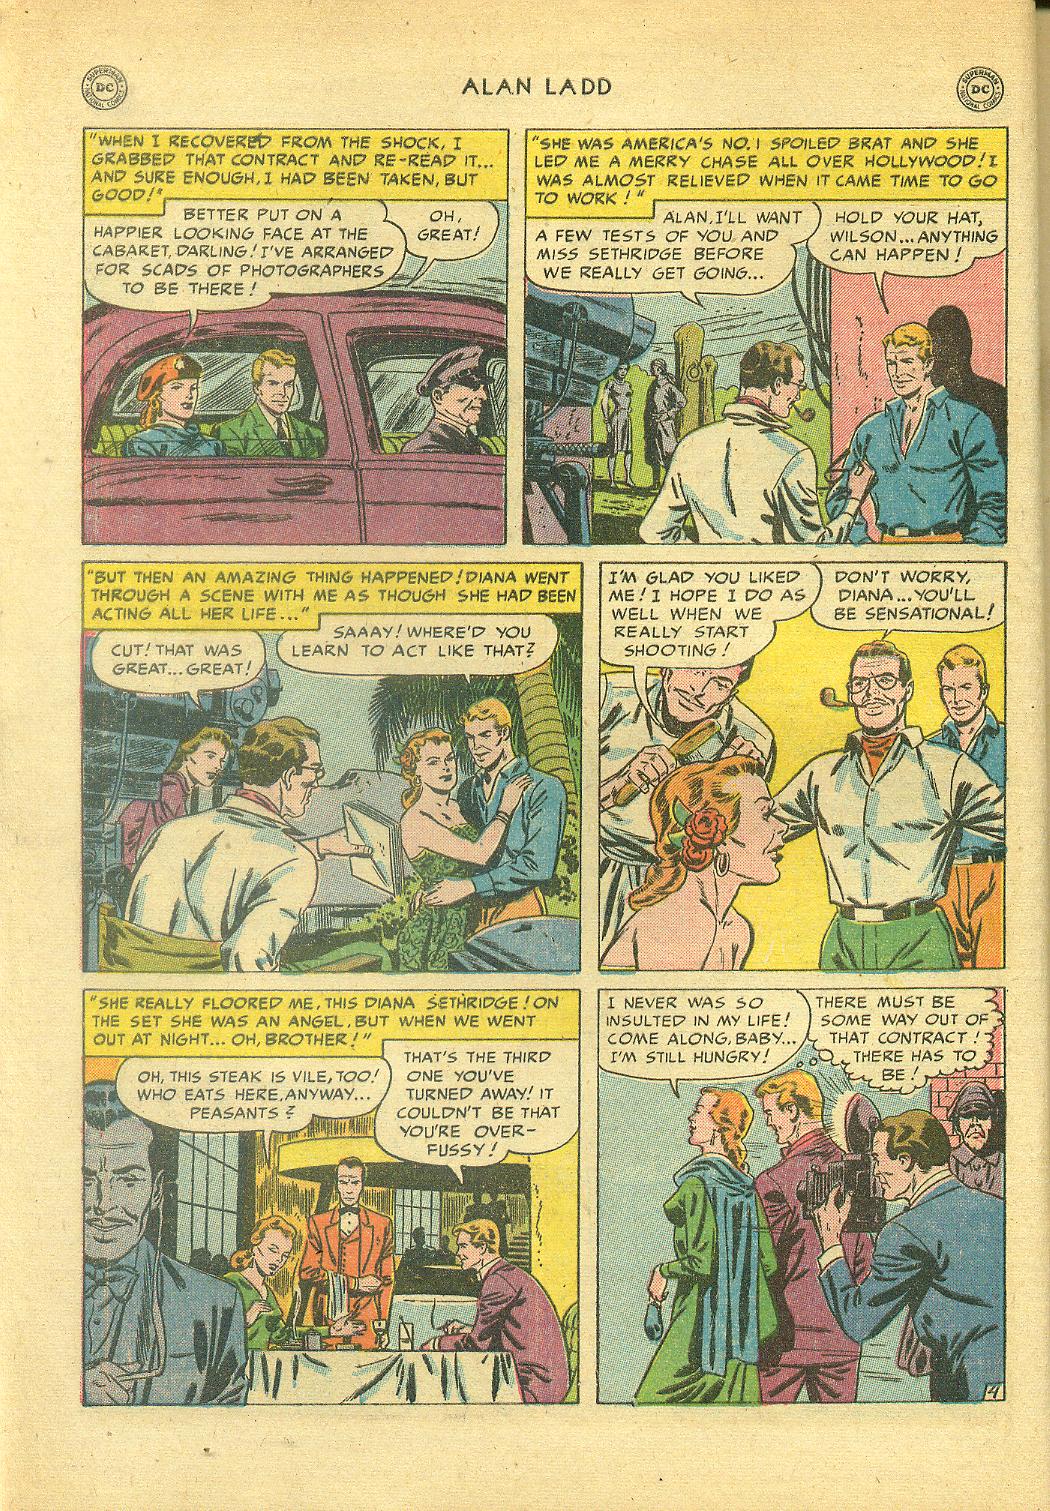 Read online Adventures of Alan Ladd comic -  Issue #3 - 6